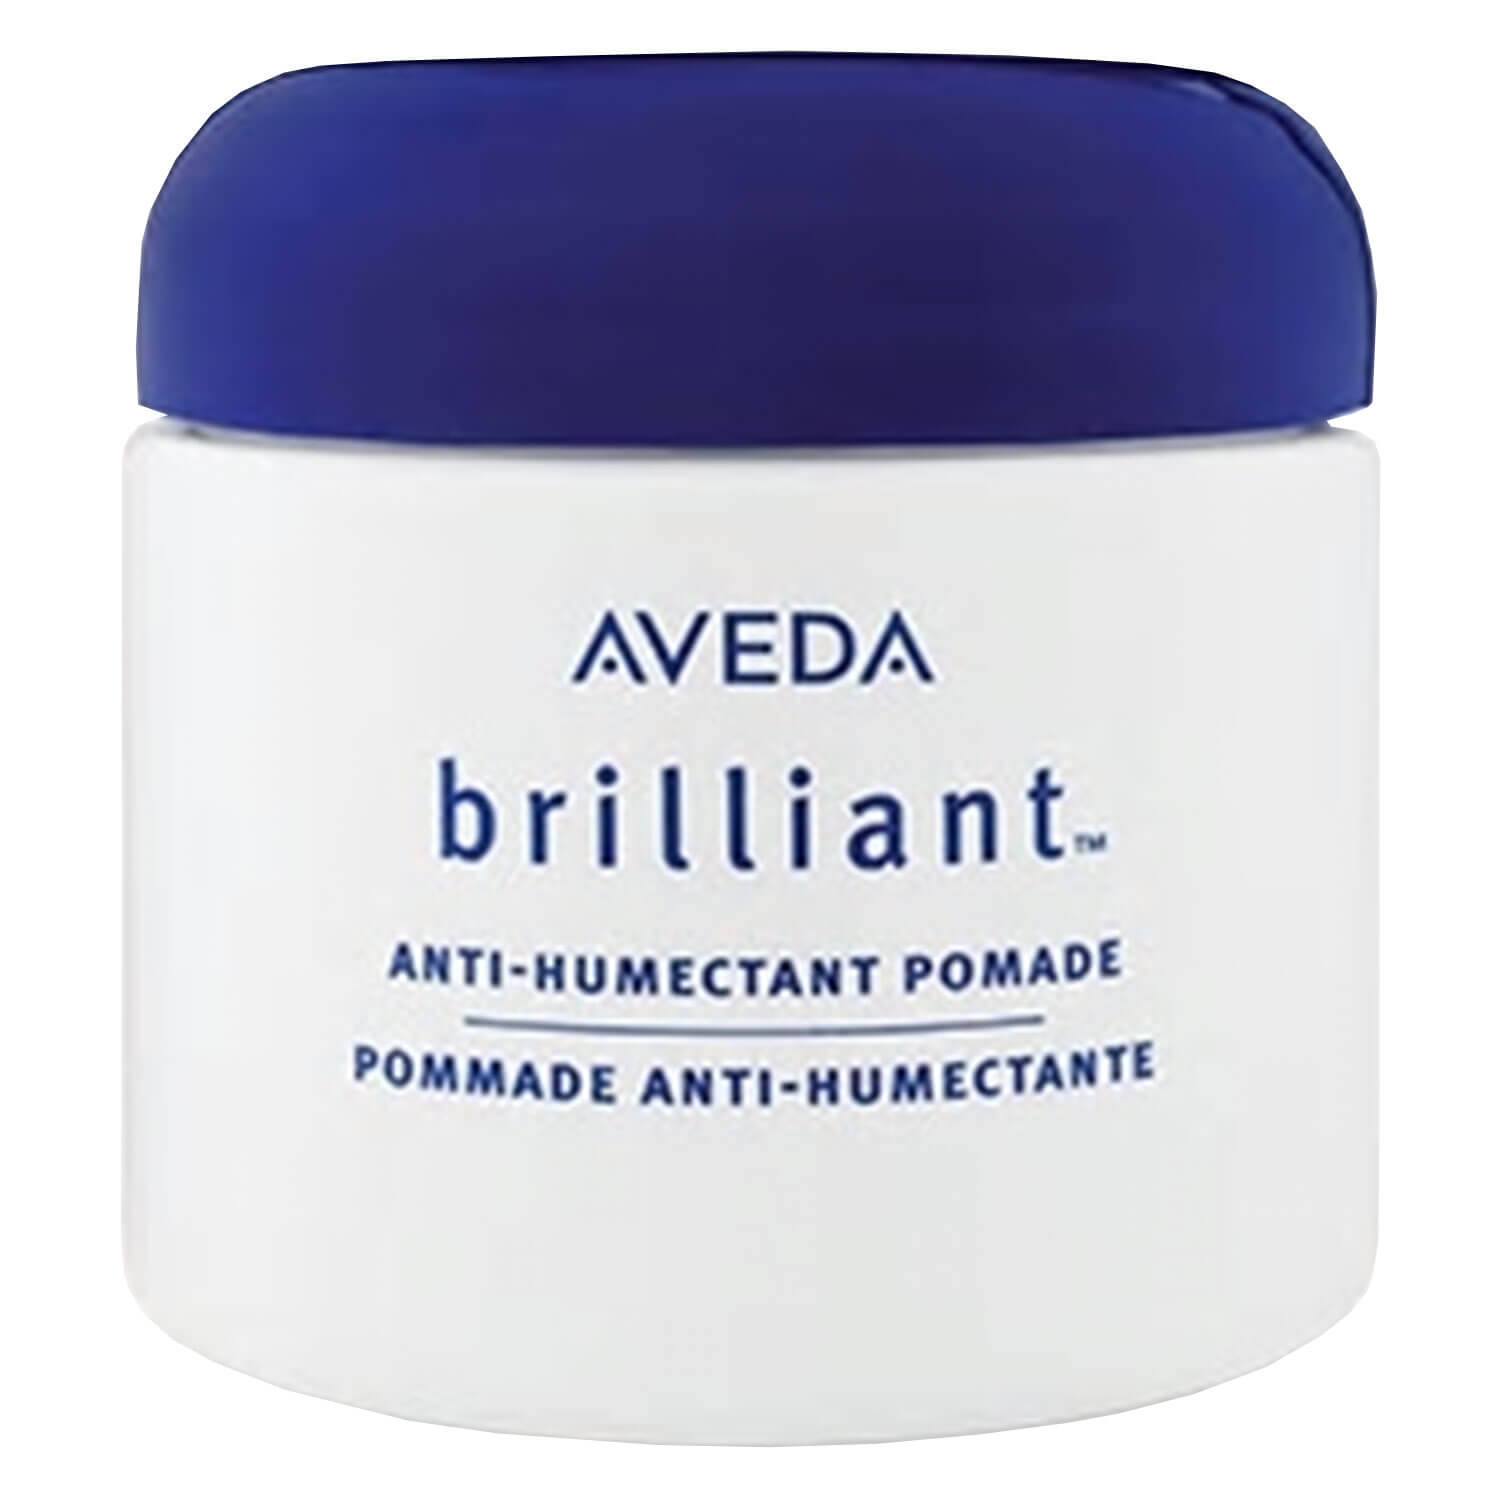 Product image from brilliant - anti-humectant pomade